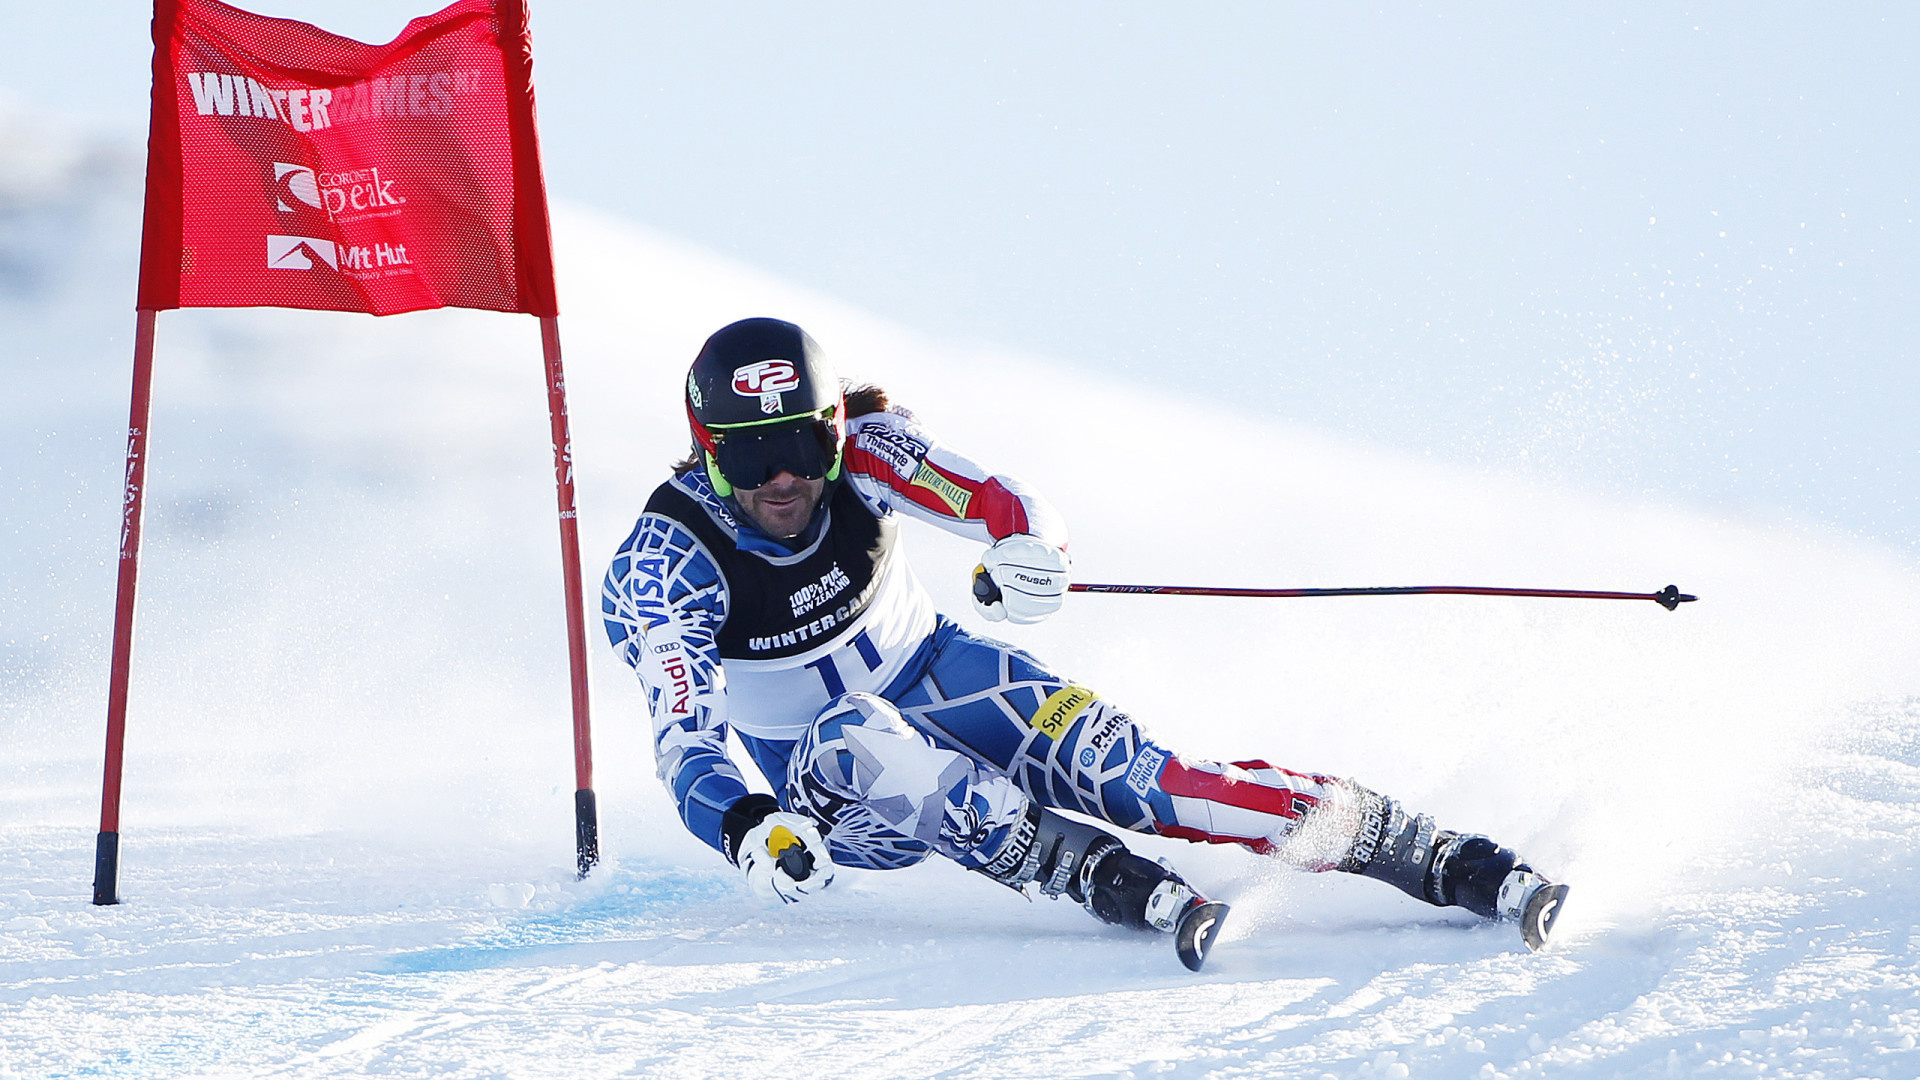 Alpine Skiing: Giant slalom, Skier, Downhill in a zigzag between upright obstacles. 1920x1080 Full HD Wallpaper.